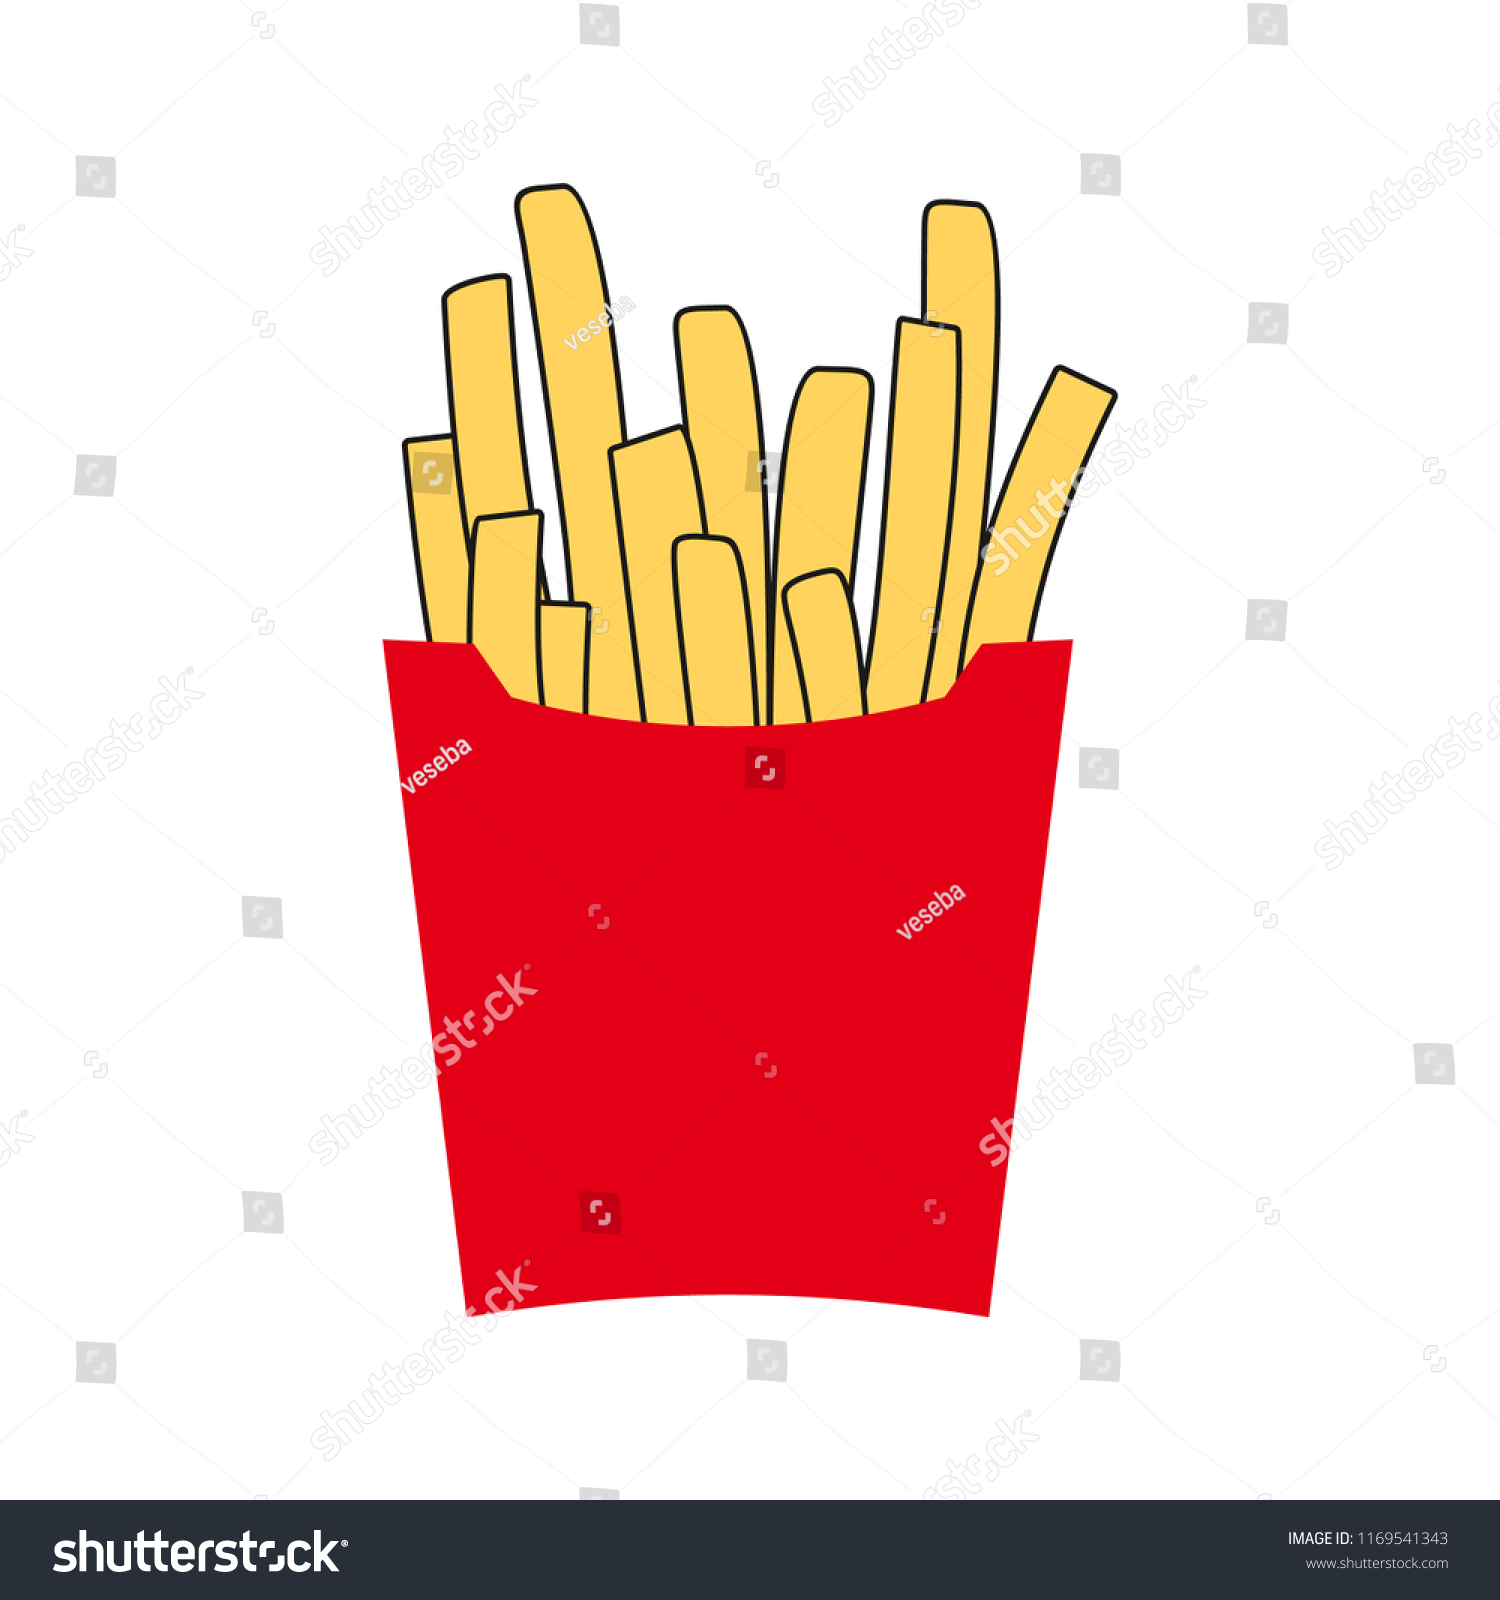 Illustration French Fries Fried Potatoes French Stock Vector (Royalty ...